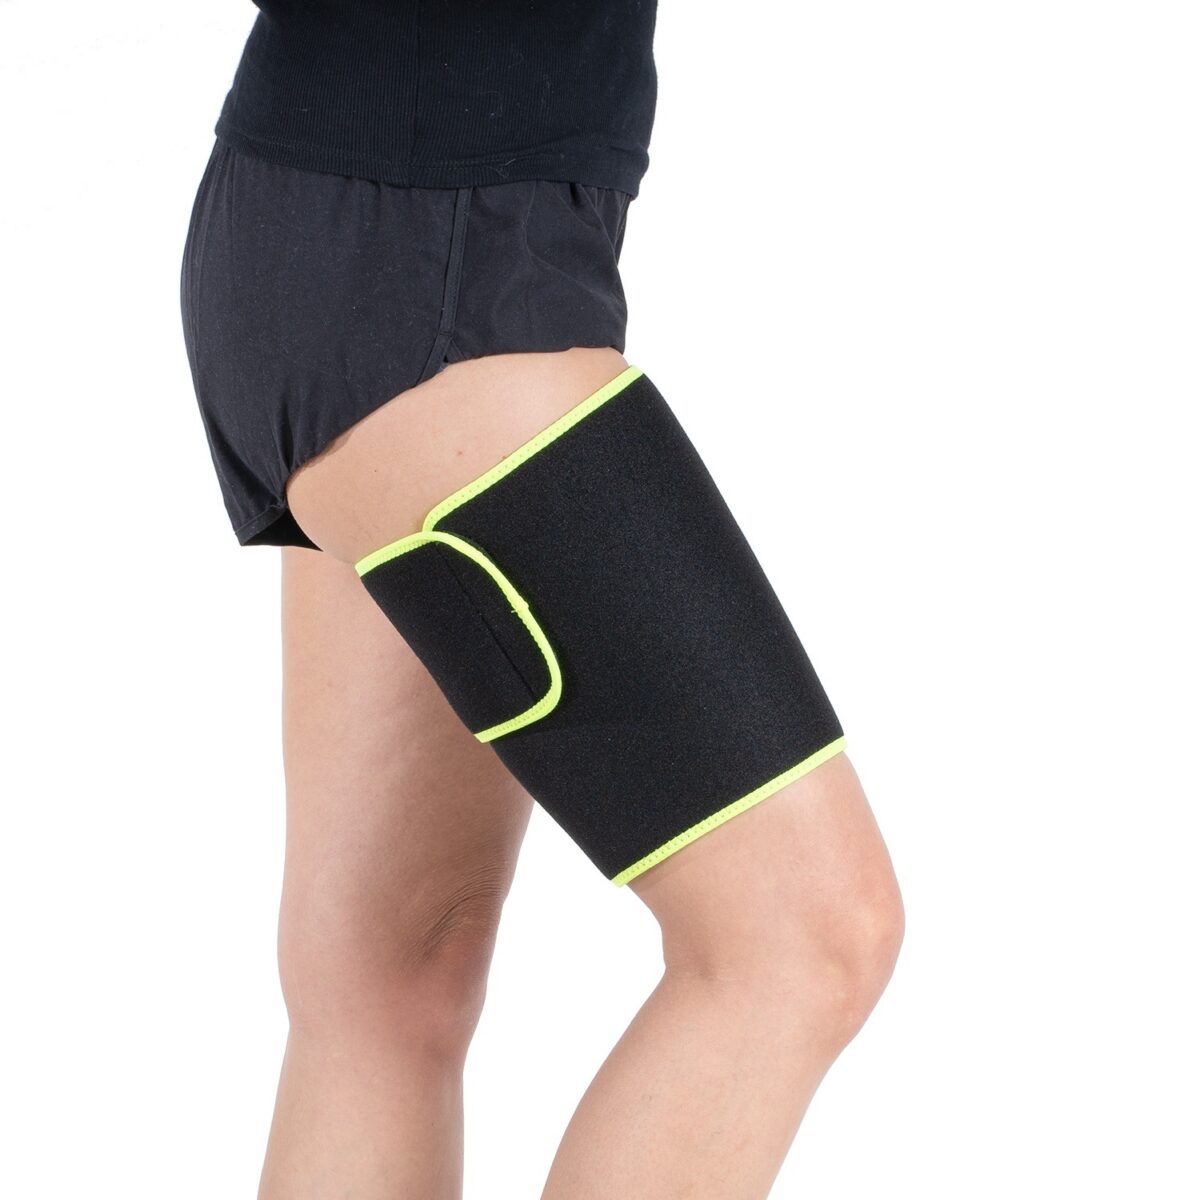 wingmed orthopedic equipments W539 thermal thigh support 72